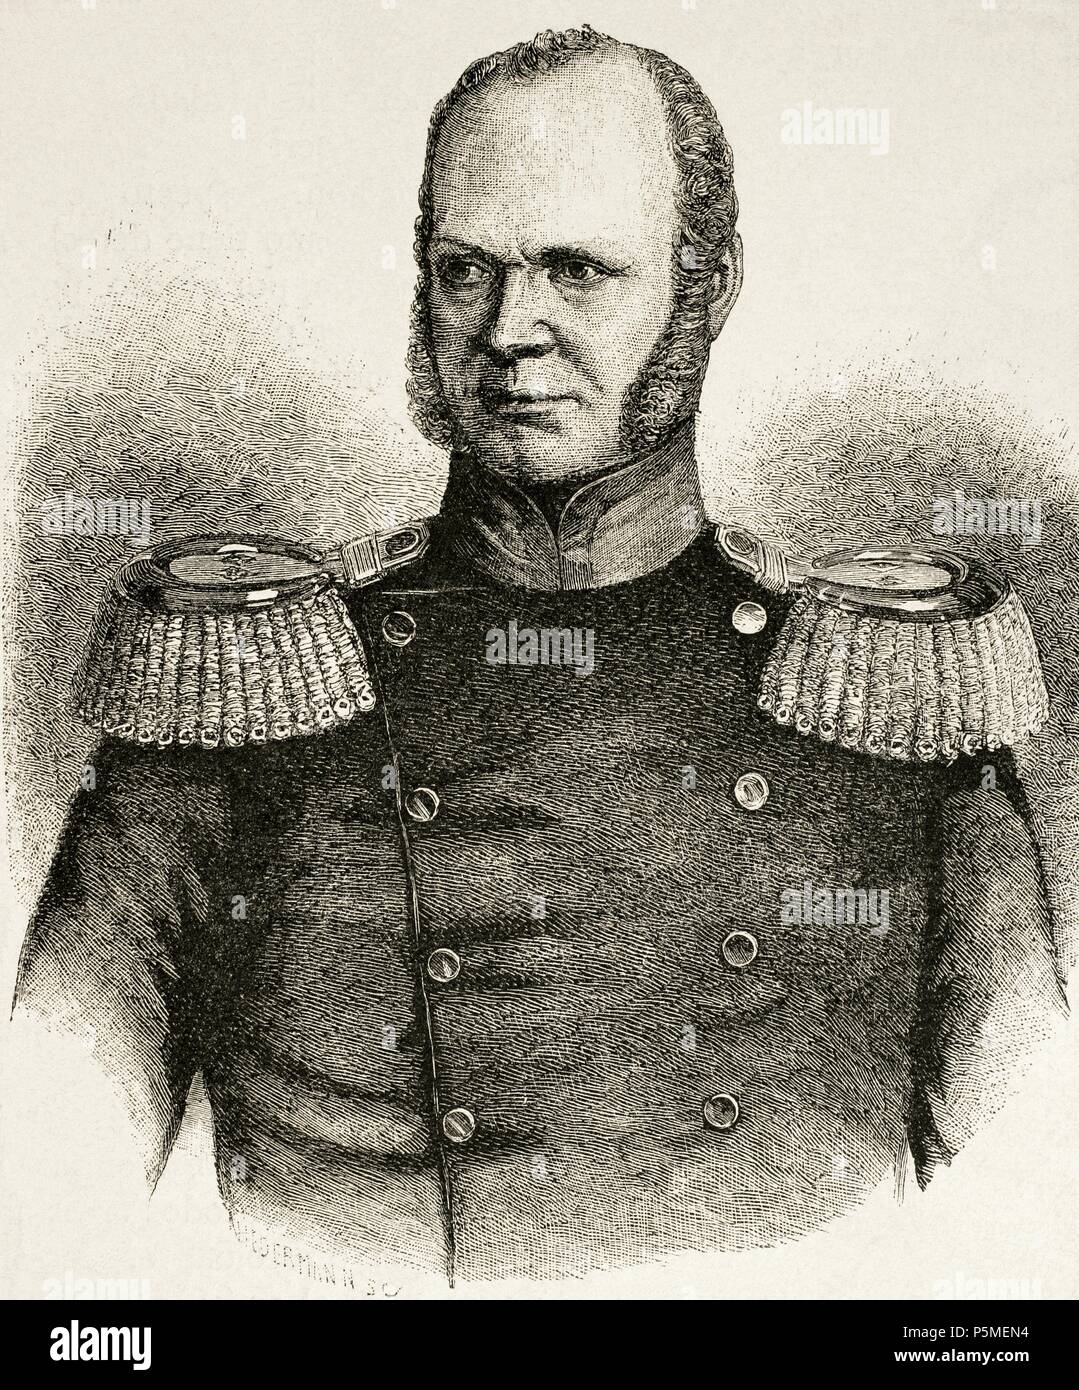 Friedrich Wilhelm, Count Brandenburg (1792-1850). German military and politician. Engraving in The Universal History, 1885. Stock Photo